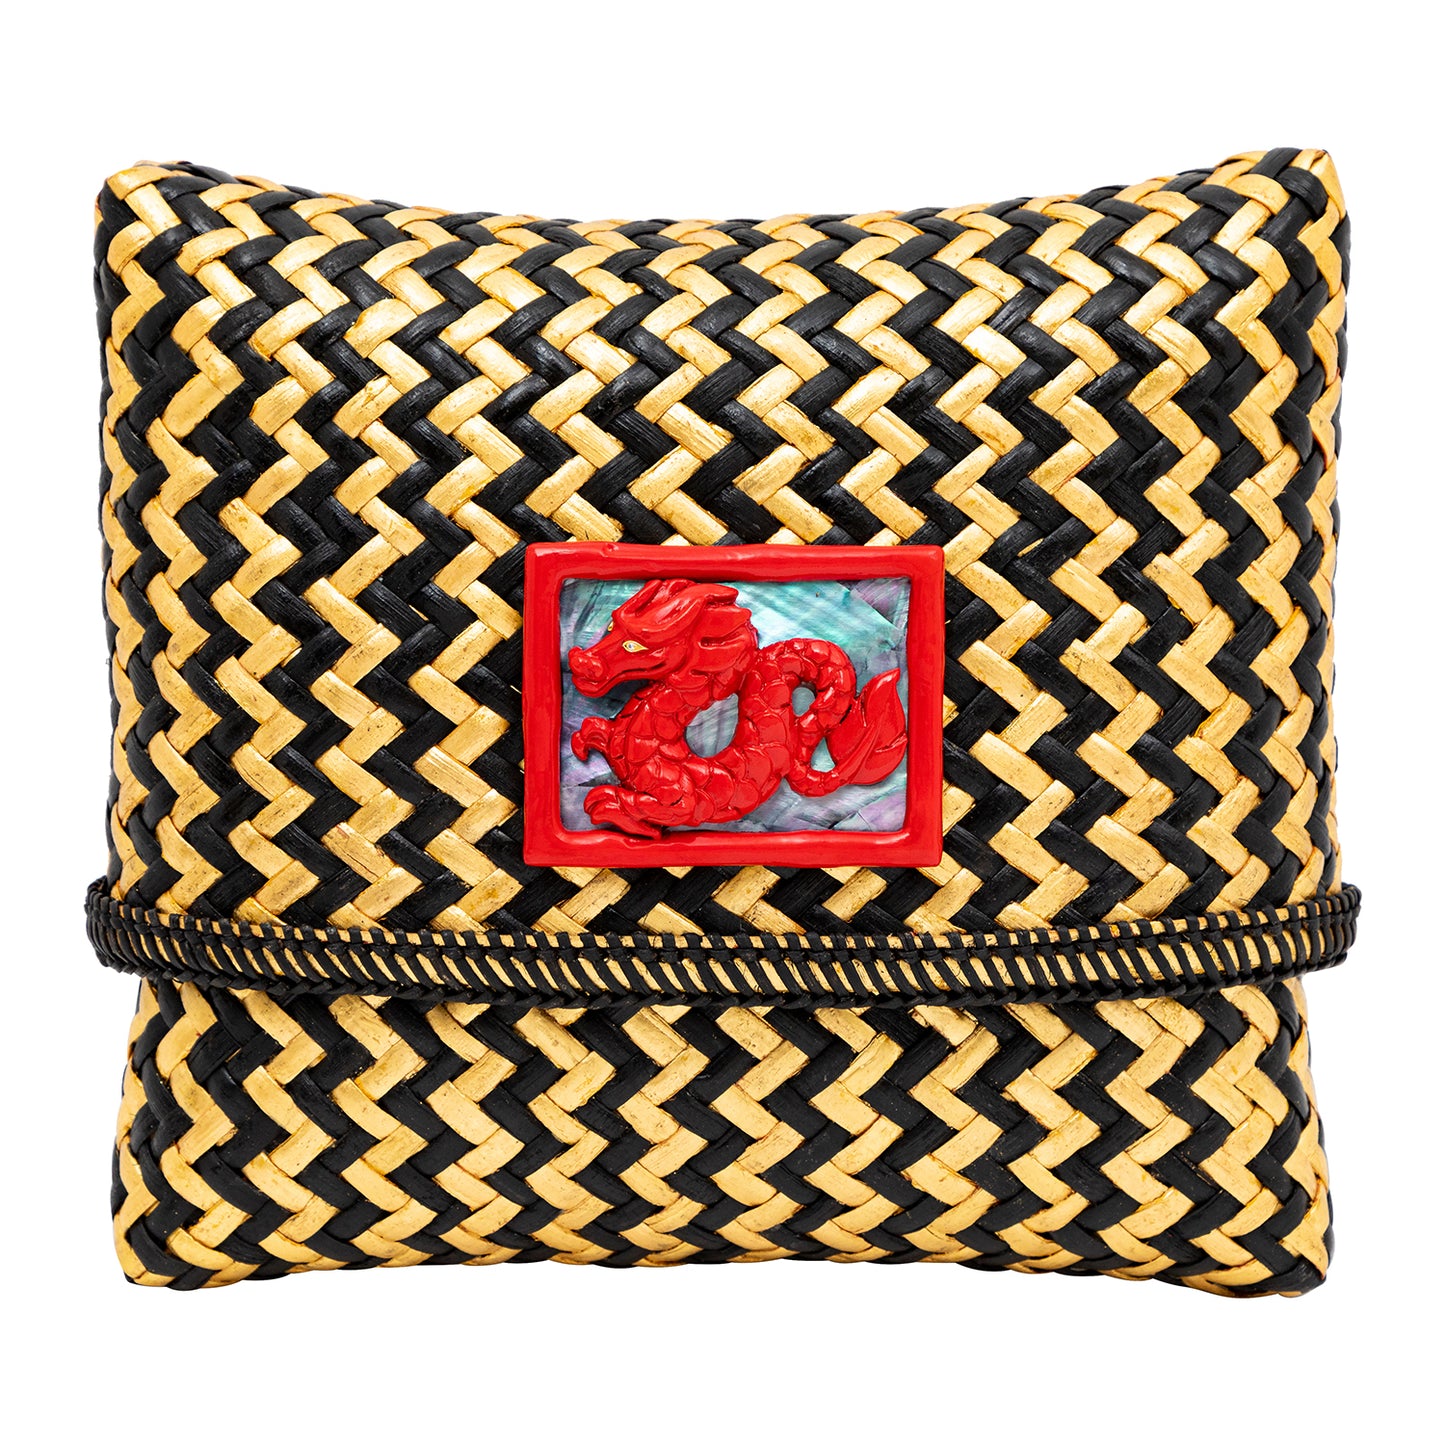 Tropical Woven Rattan Bags with Chinese Zodiac - Dragon